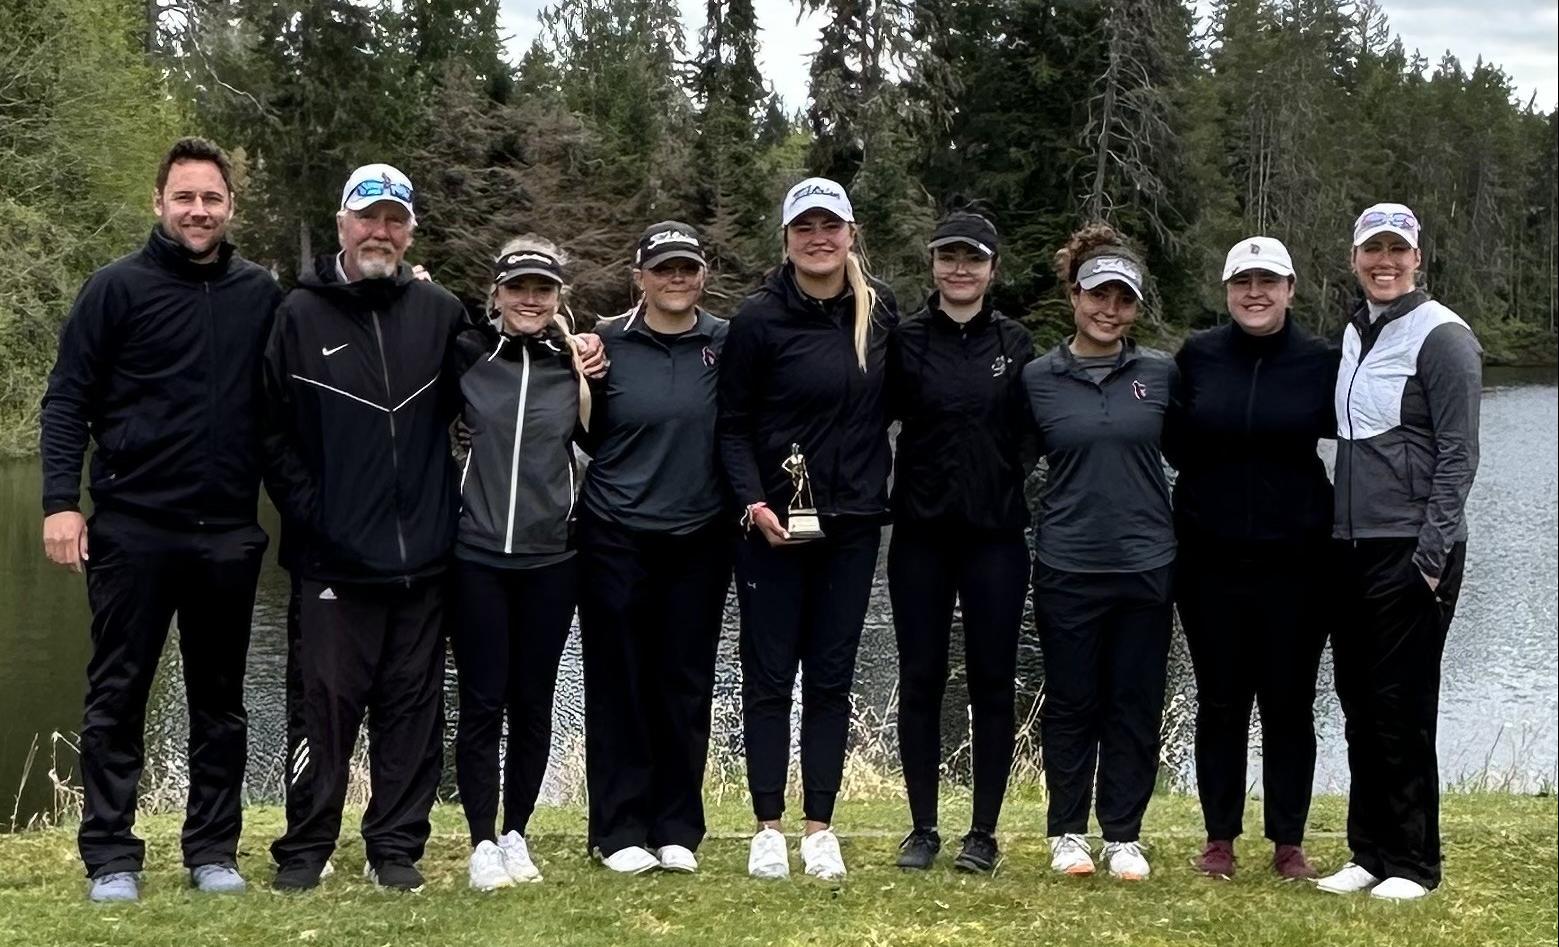 The North Idaho College women's golf team won the Olympic Invitational on Monday at Port Orchard, Wash. From left are head coach Russell Grove, volunteer coach Russ Grove, Rien Solodan, Megan Quinton, Ava Young, Lauryn Bulger, Laila Jalil, Sofia Lippiello and assistant coach Brittany Pounds.